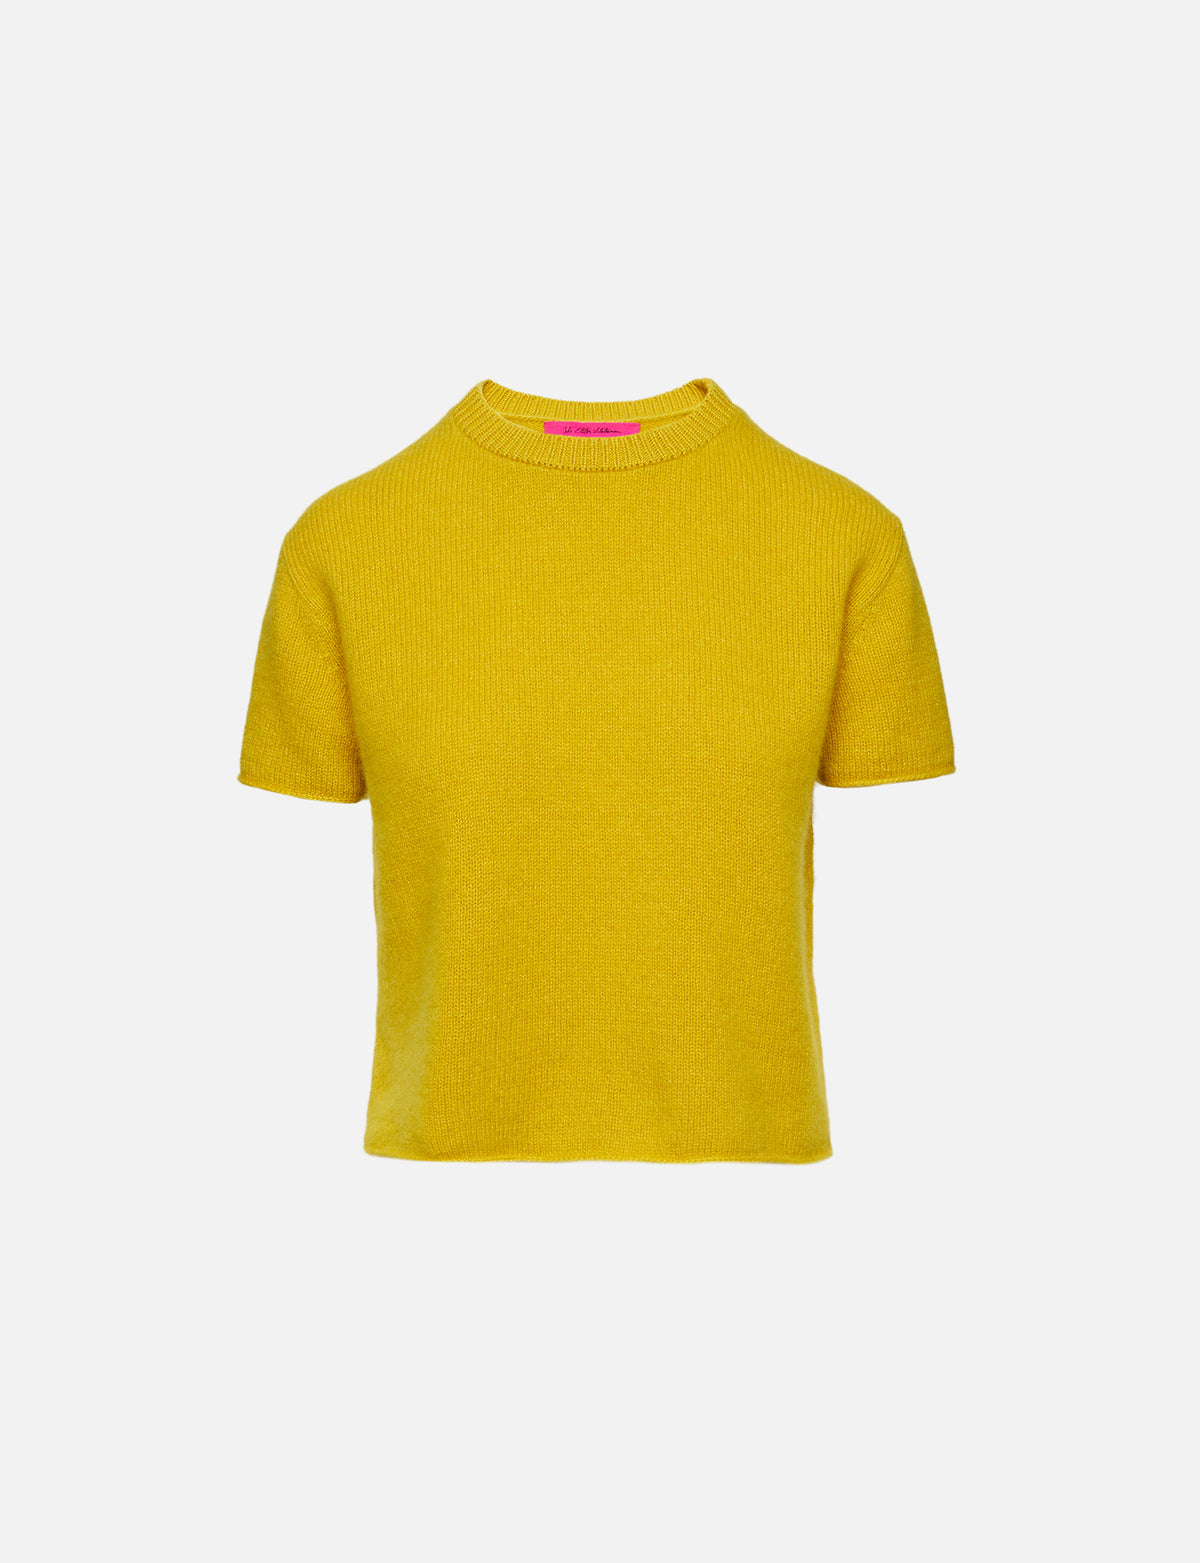 view 7 - Cashmere Short Sleeve Top